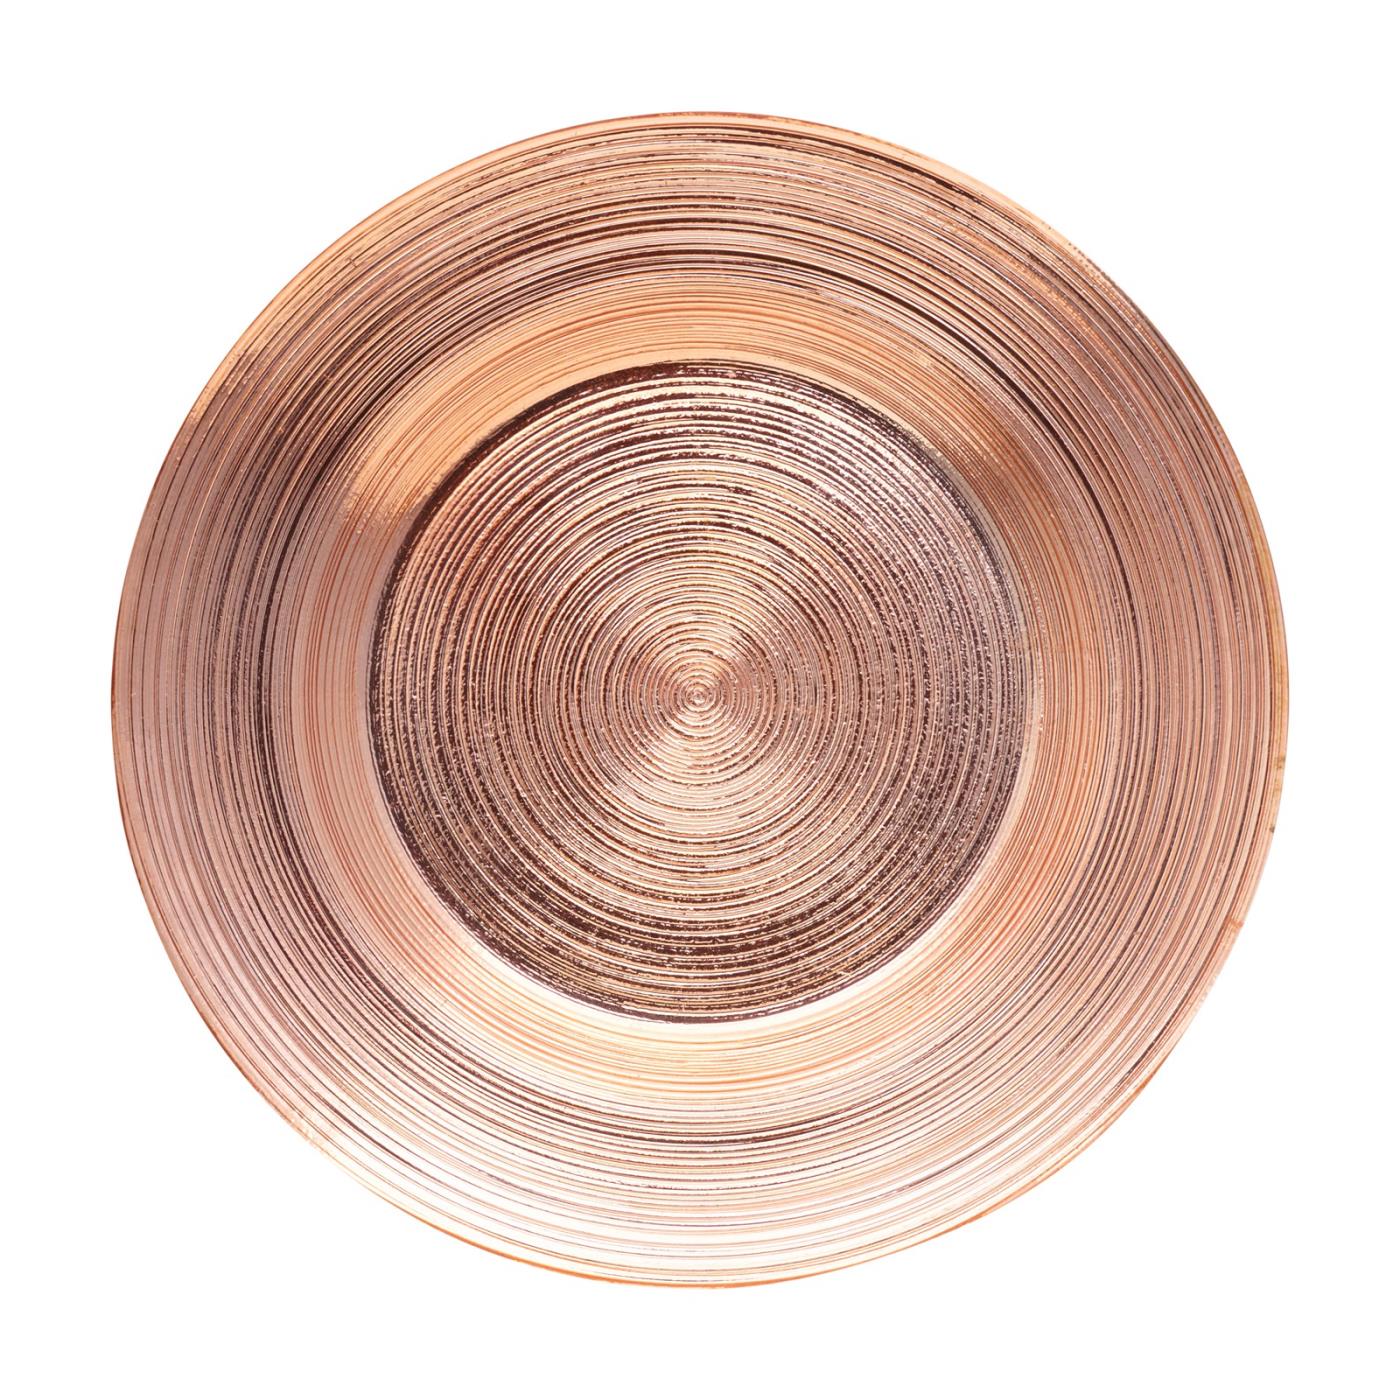 Copper Ring Glass Charger - 11.5"